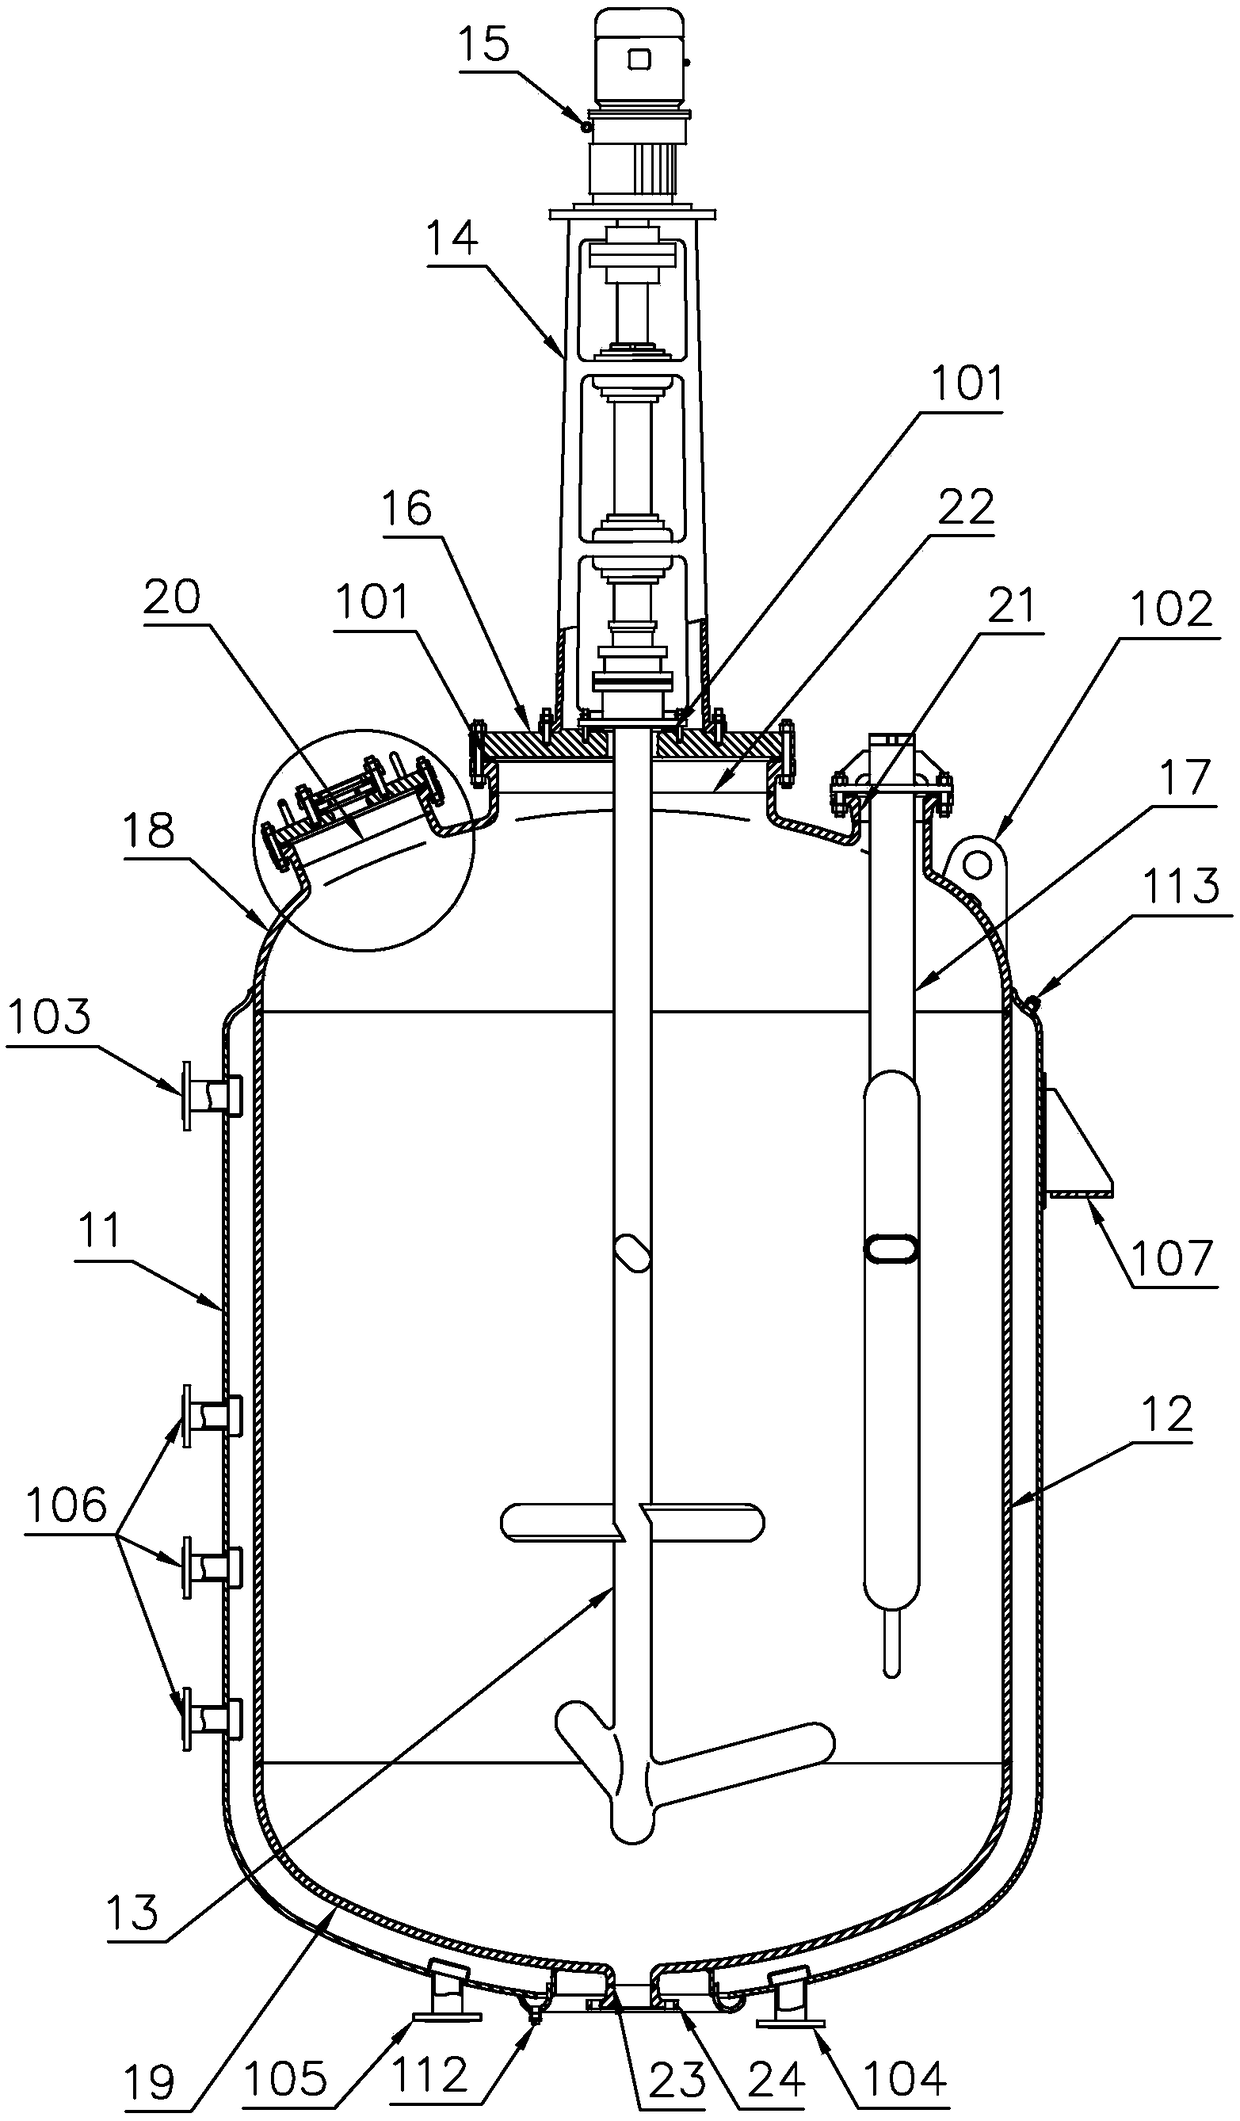 A high-strength corrosion-resistant glass-lined reactor